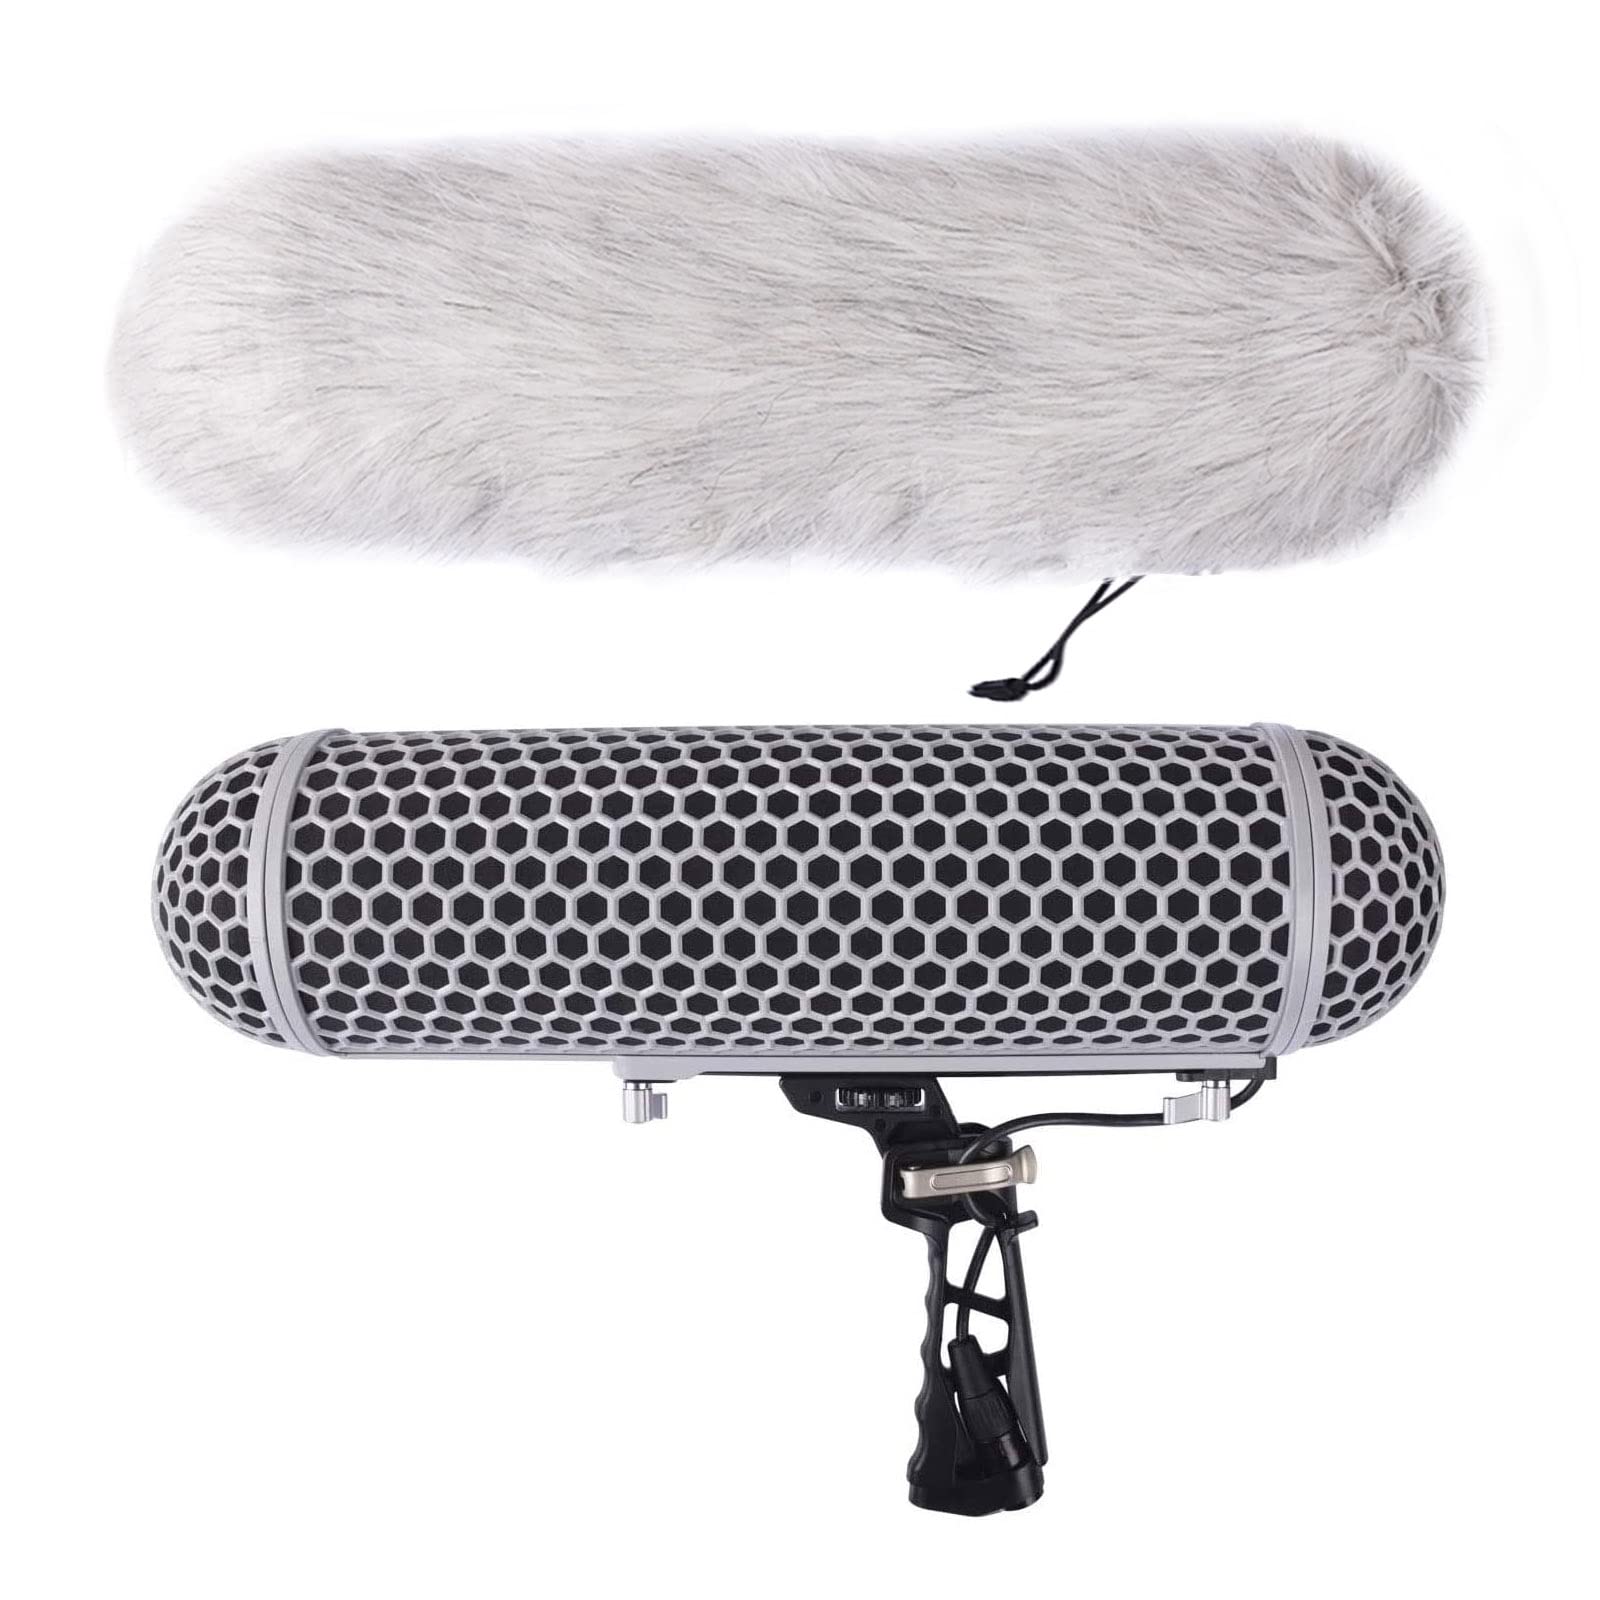  DF DIGITALFOTO Micolive Microphone Windshield Blimp Windscreen Style Protect Cage and Shock Mount Suspension System Compatible with Rode NTG1 NTG2 NTG3 NTG4 AT875R Line MKE 600 Series Shotgun Microphones...